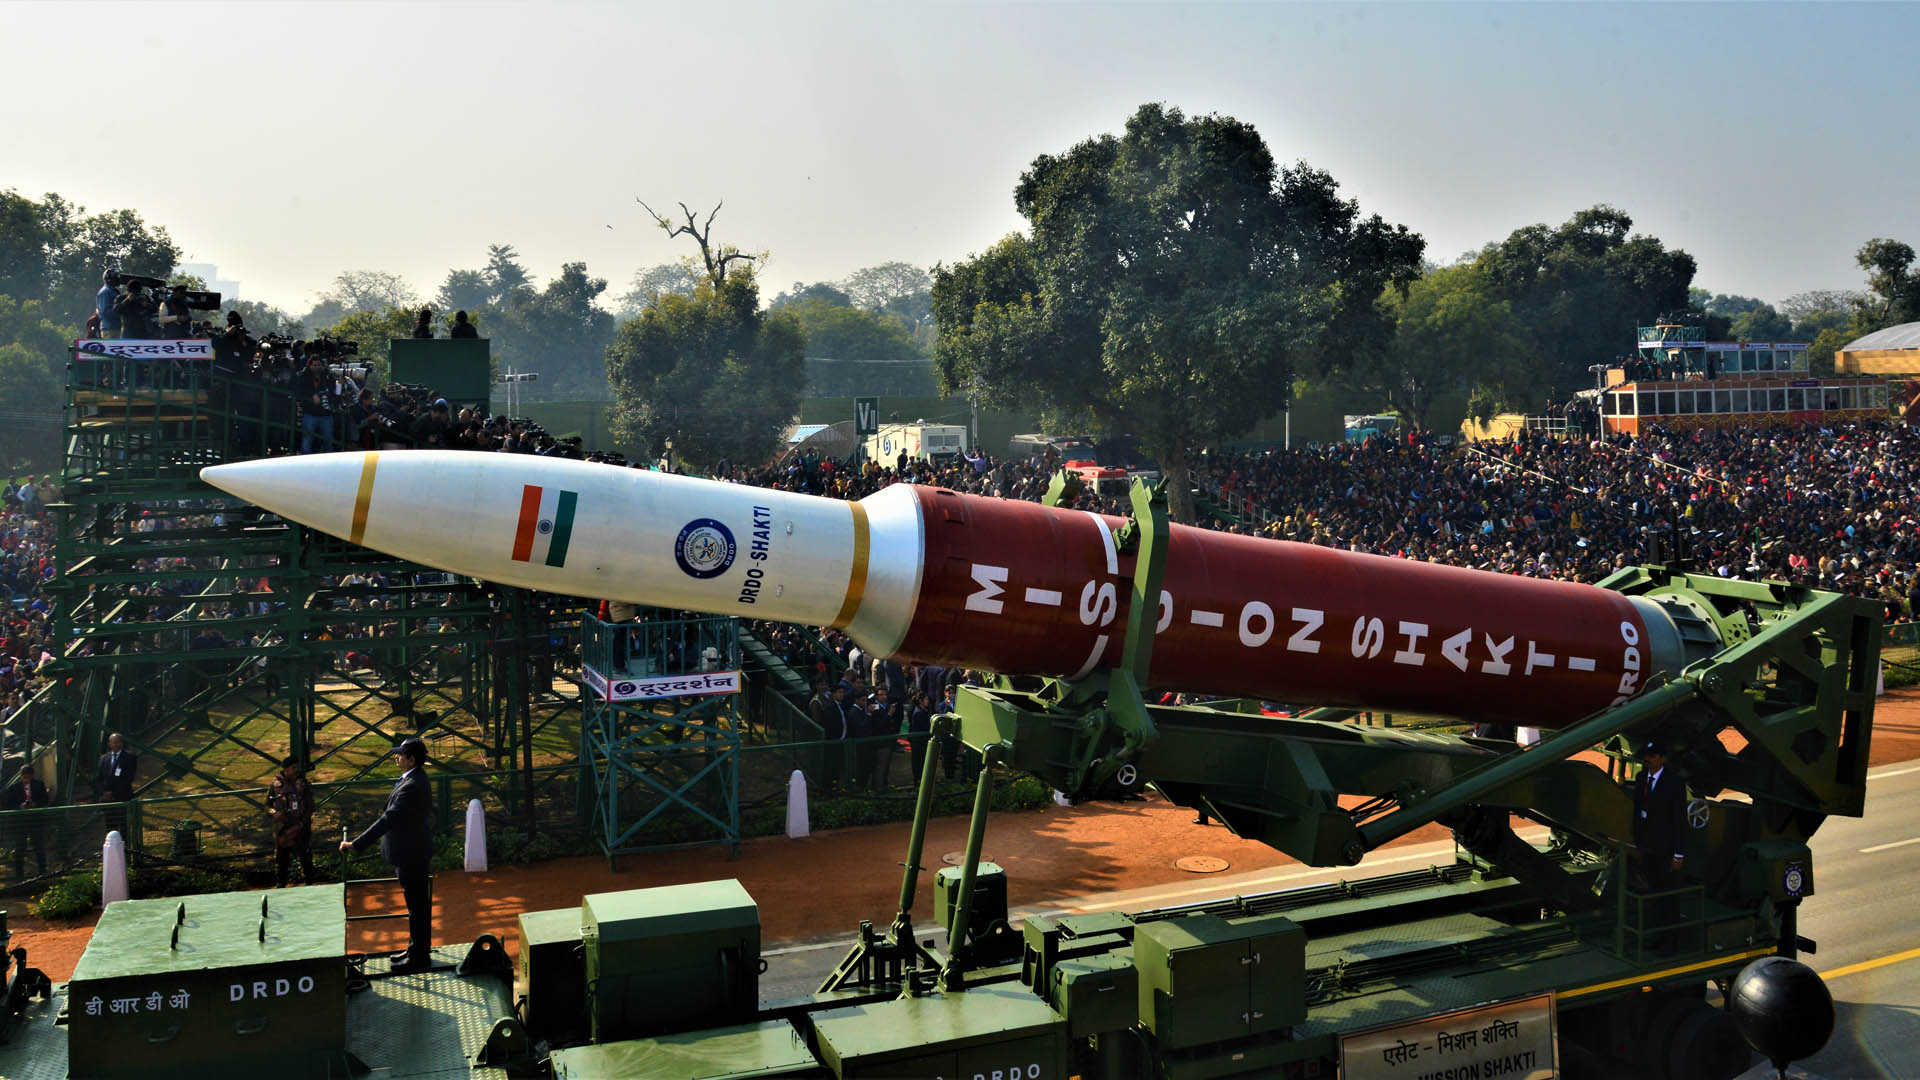 An Anti-Satellite Weapon (ASAT) from Mission Shakti paraded in New Delhi, India in January 2020.